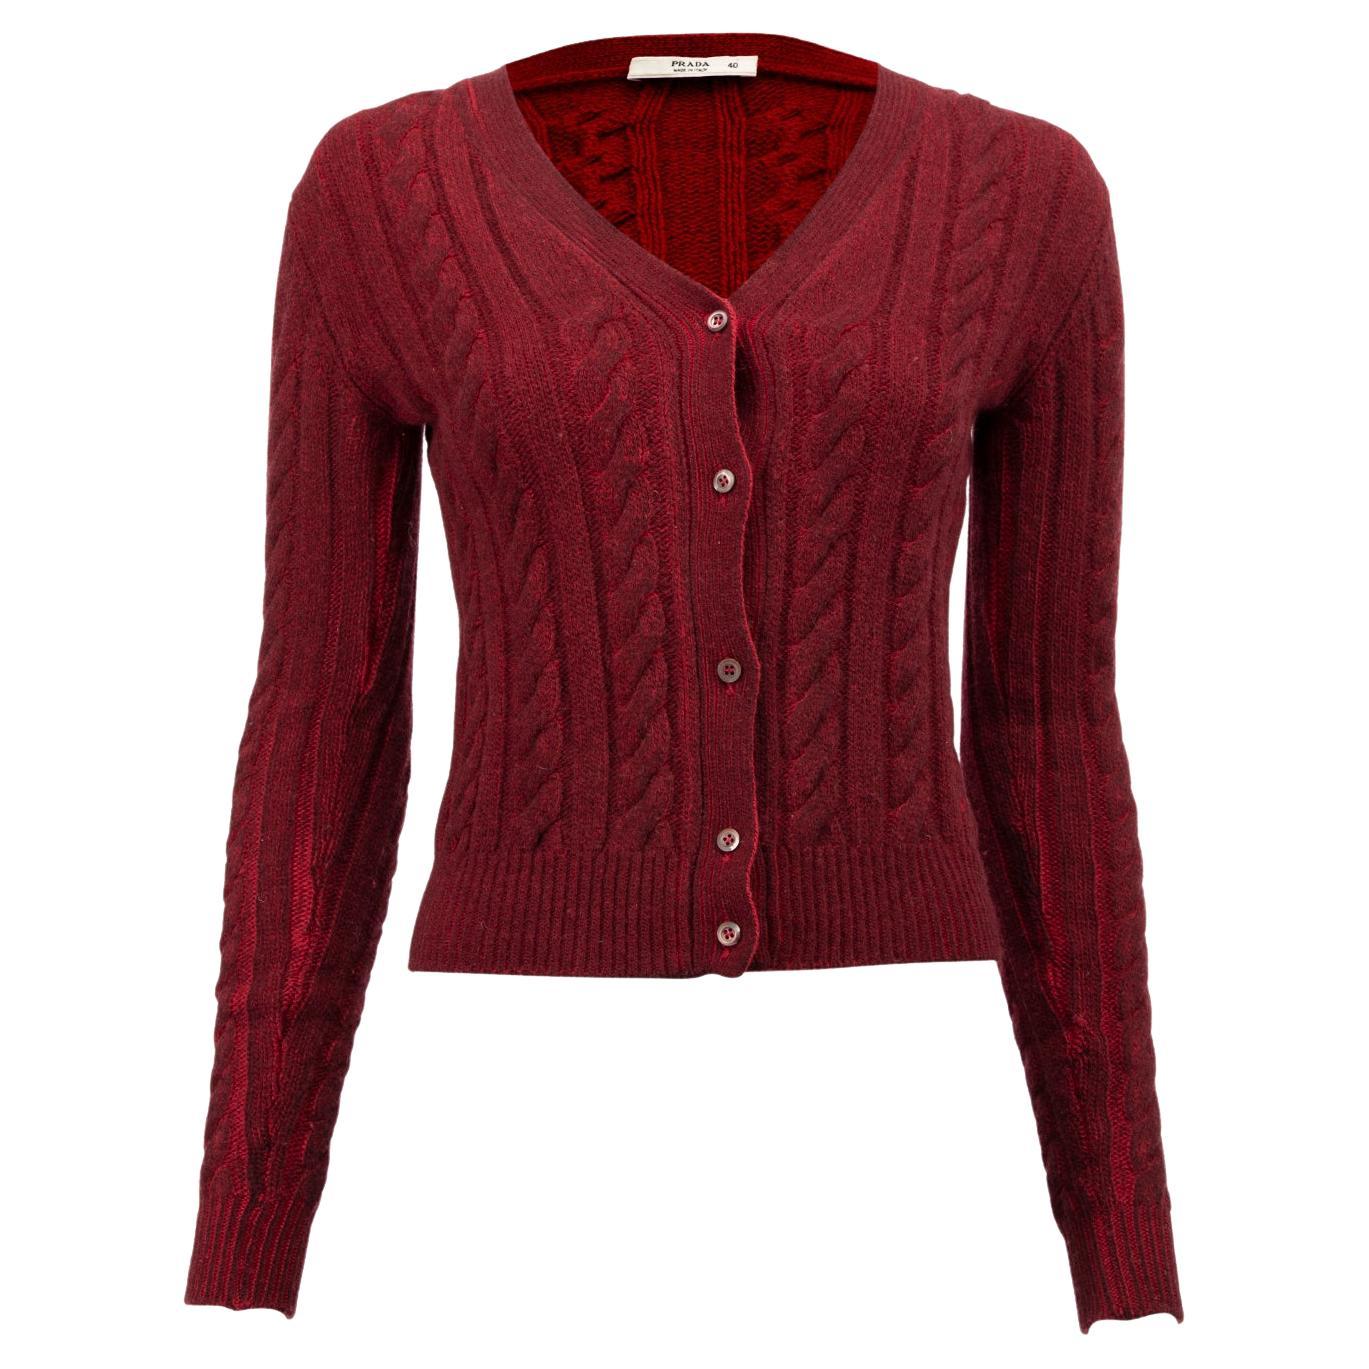 Pre-Loved Prada Women's Burgundy Cable Knit Cardigan For Sale